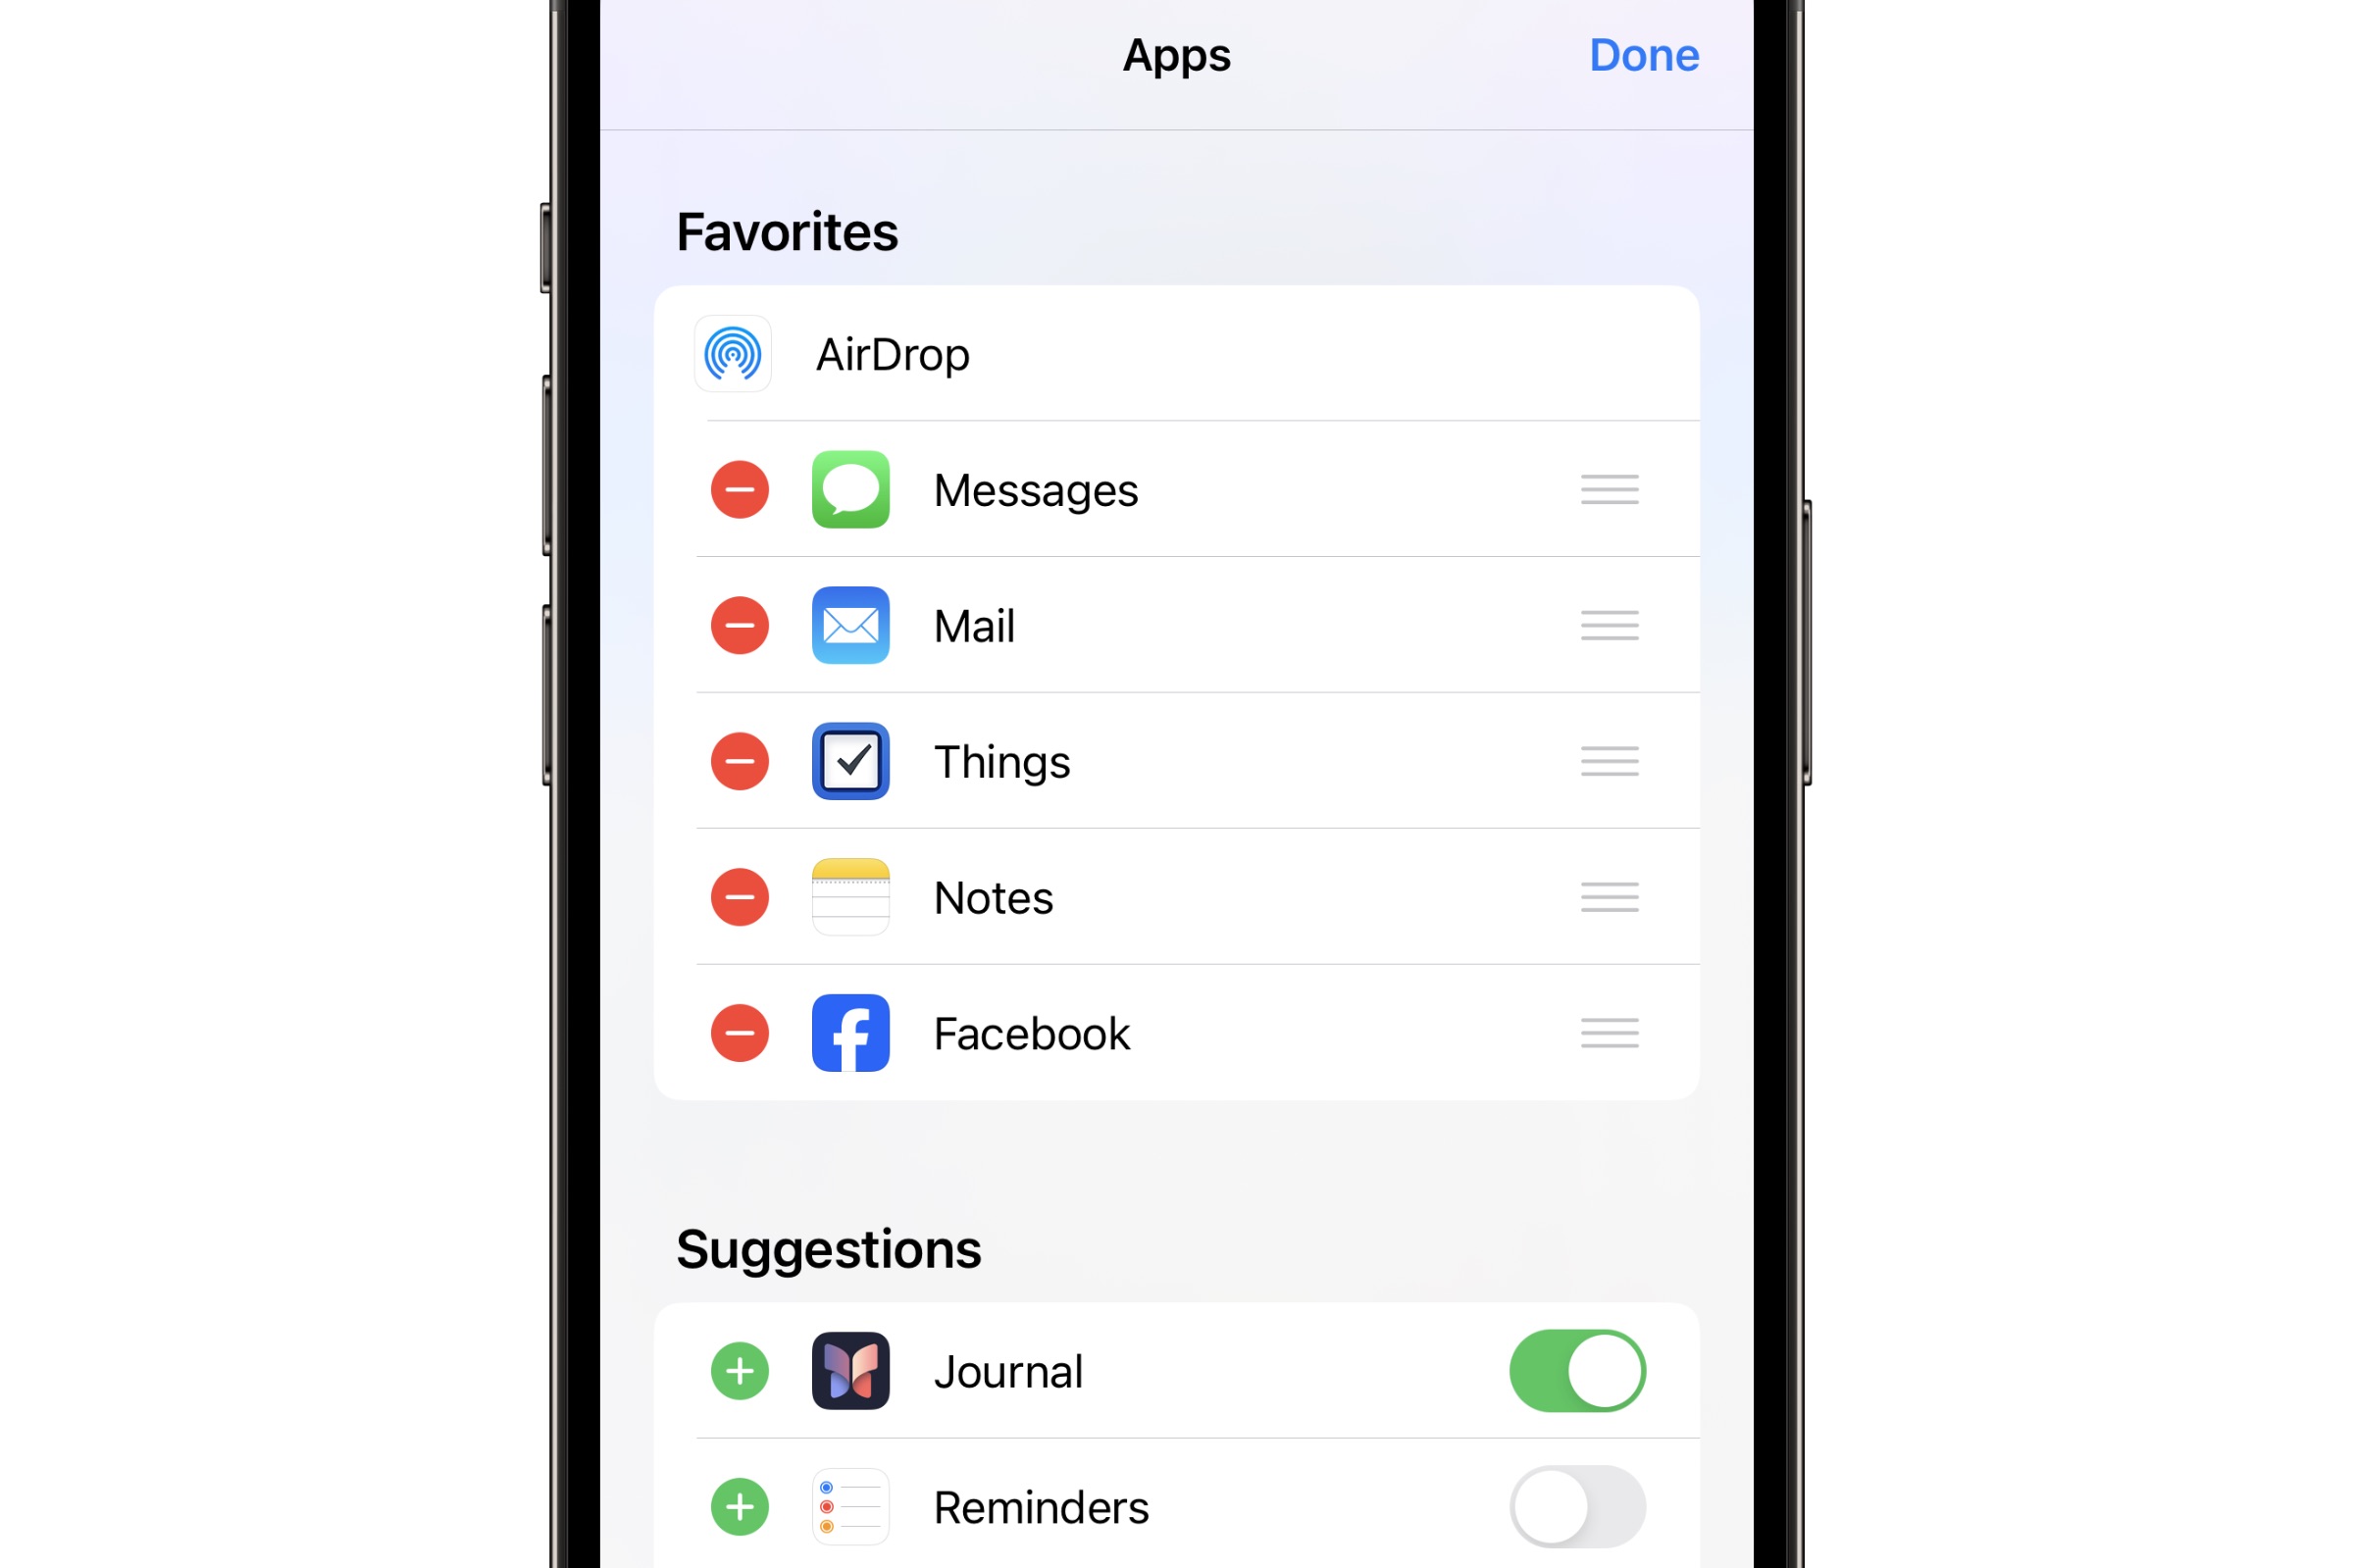 Adding Journal to the iOS Share Sheet favorites in iOS 17.2.